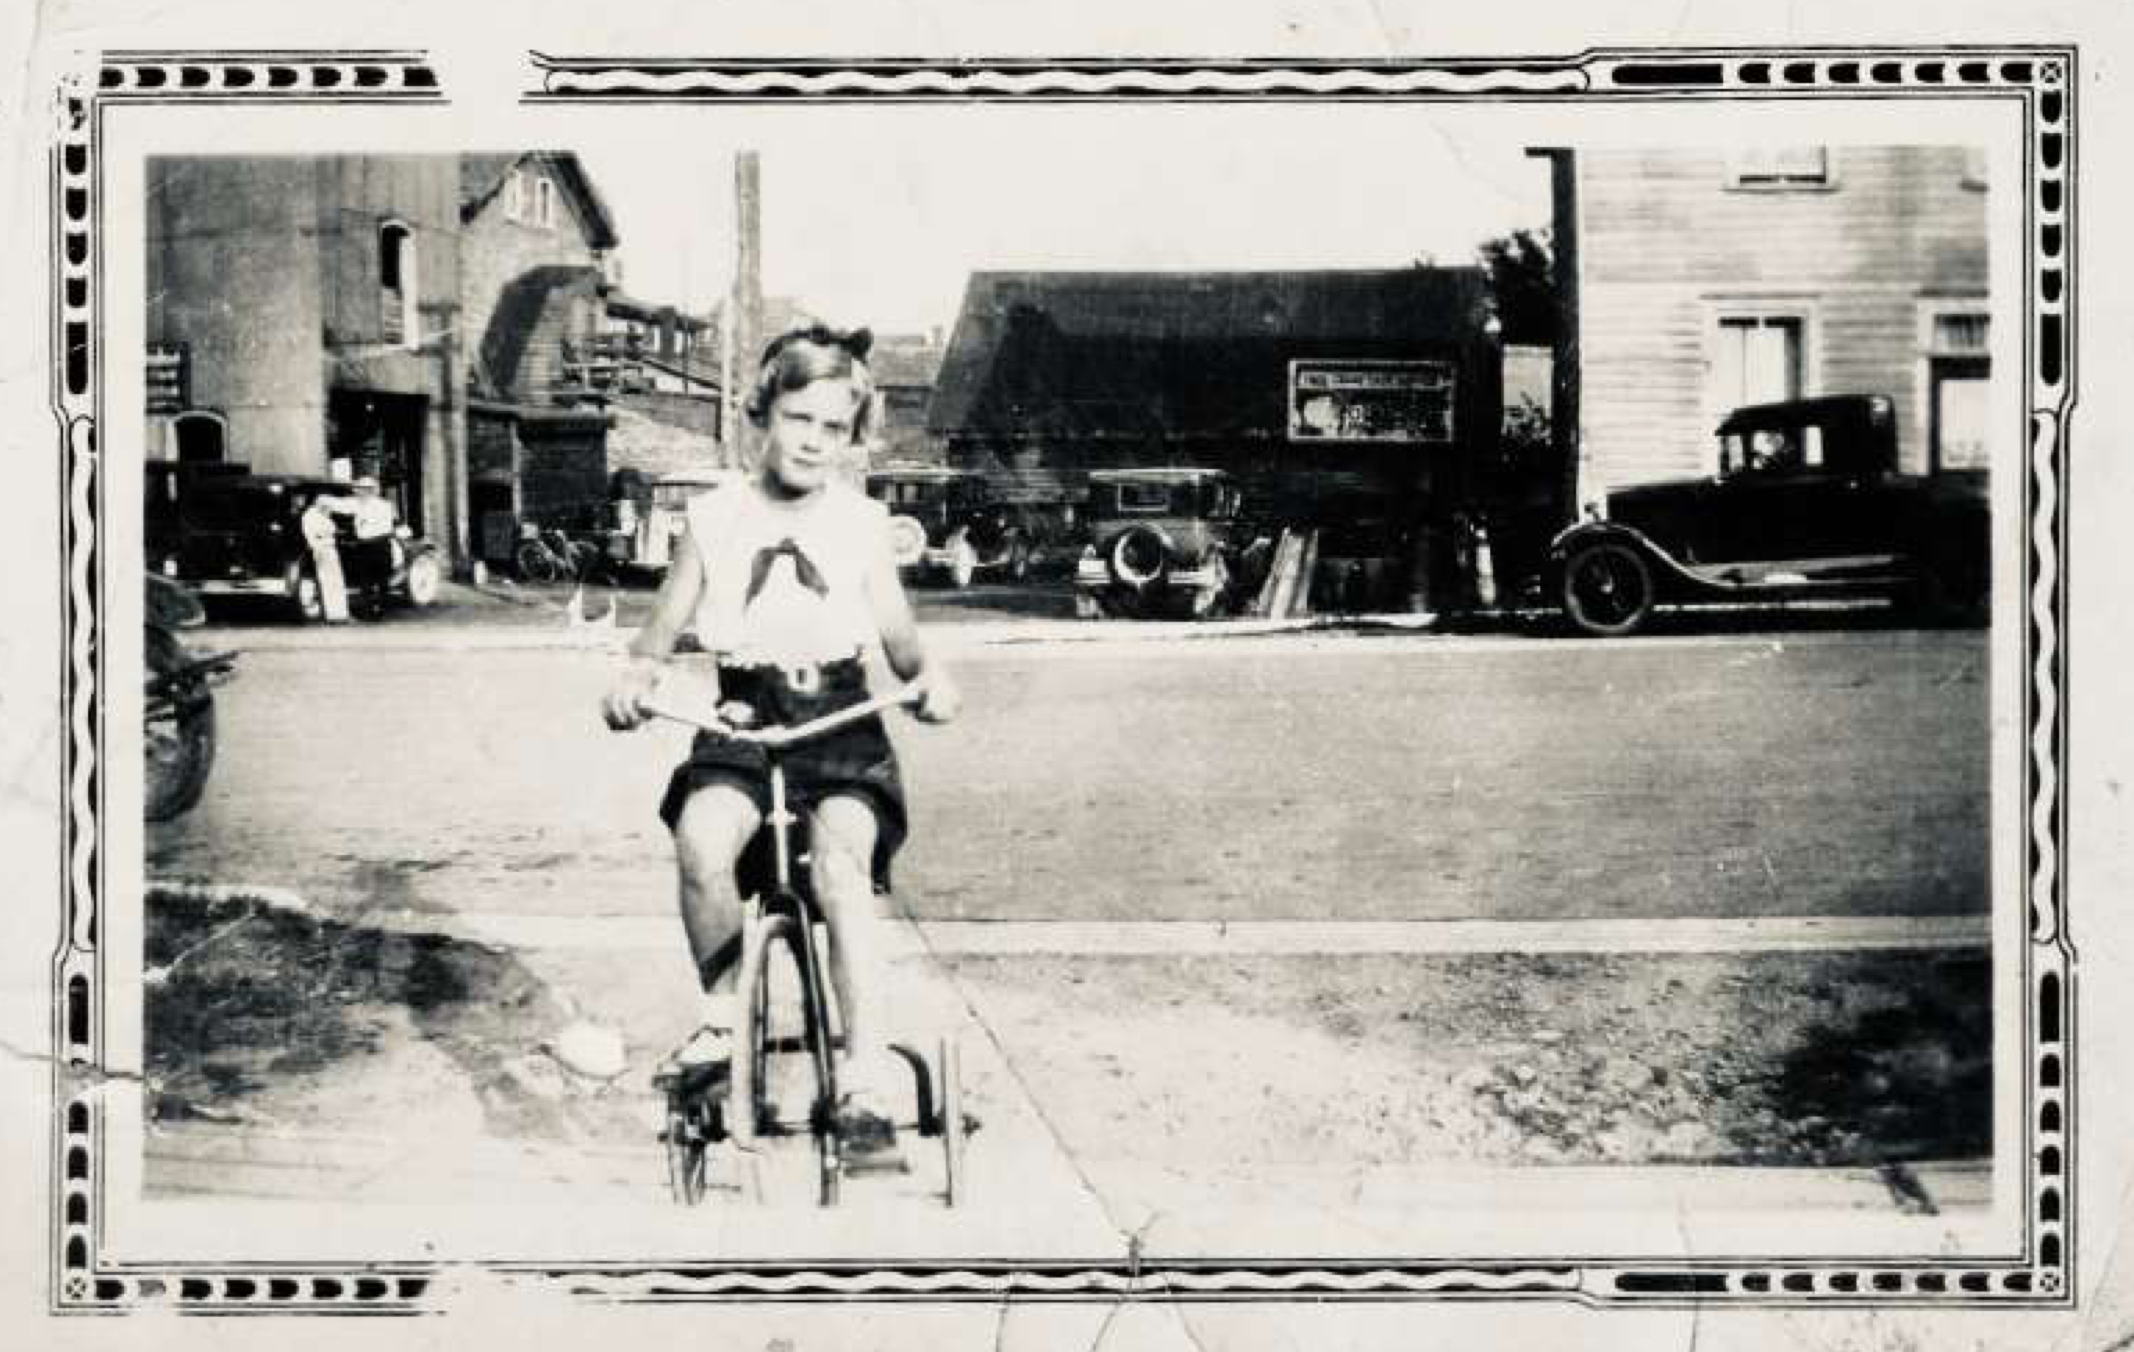 Jacqueline Stunden on a tricycle with Whitaker’s garage in the background. | Oakville Historical Society